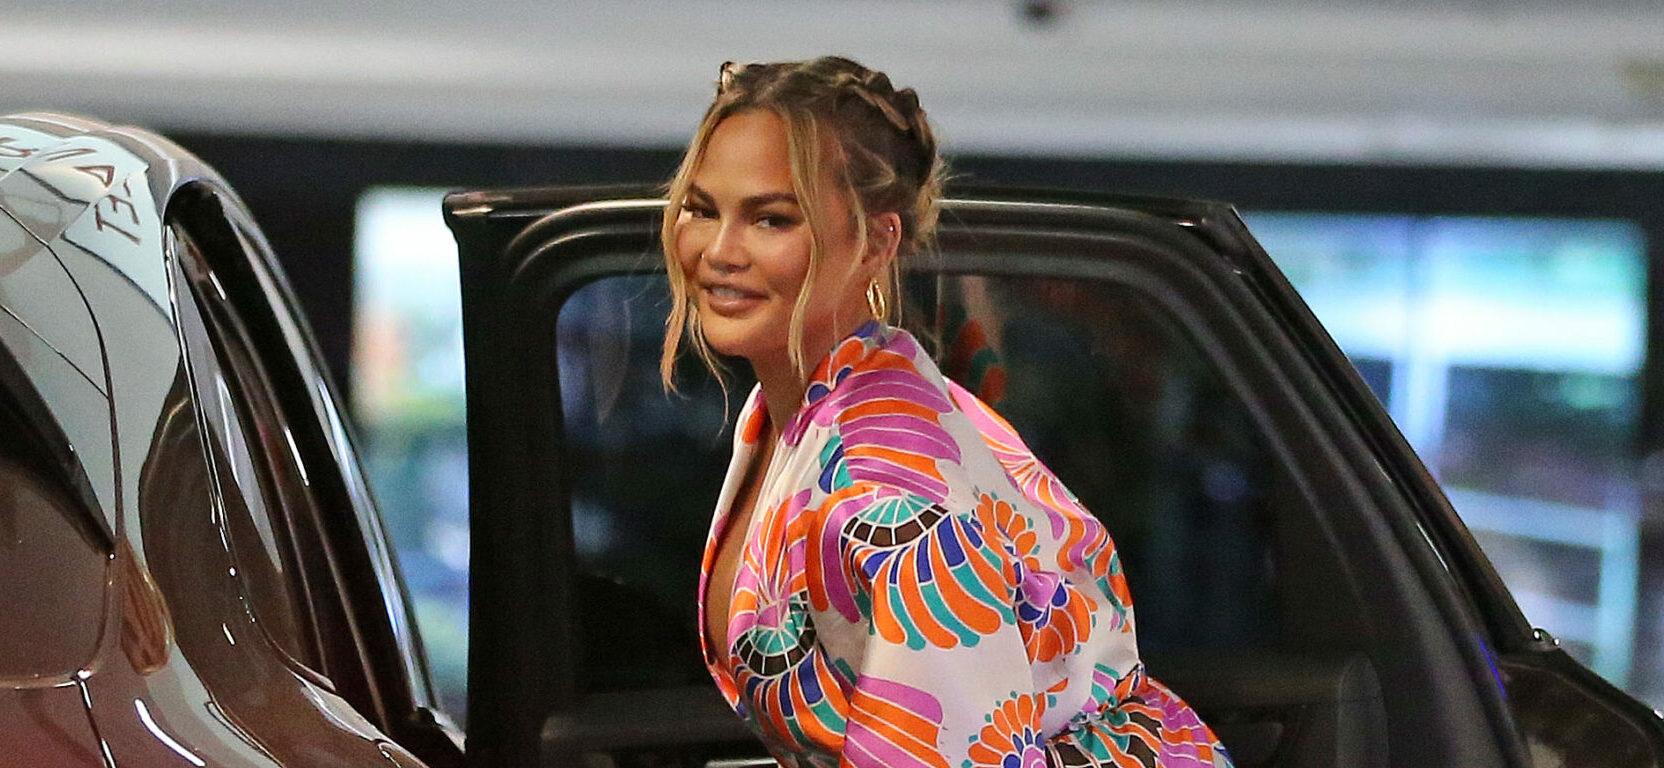 Chrissy Teigen and John Legend are seen after a shopping trip with their children